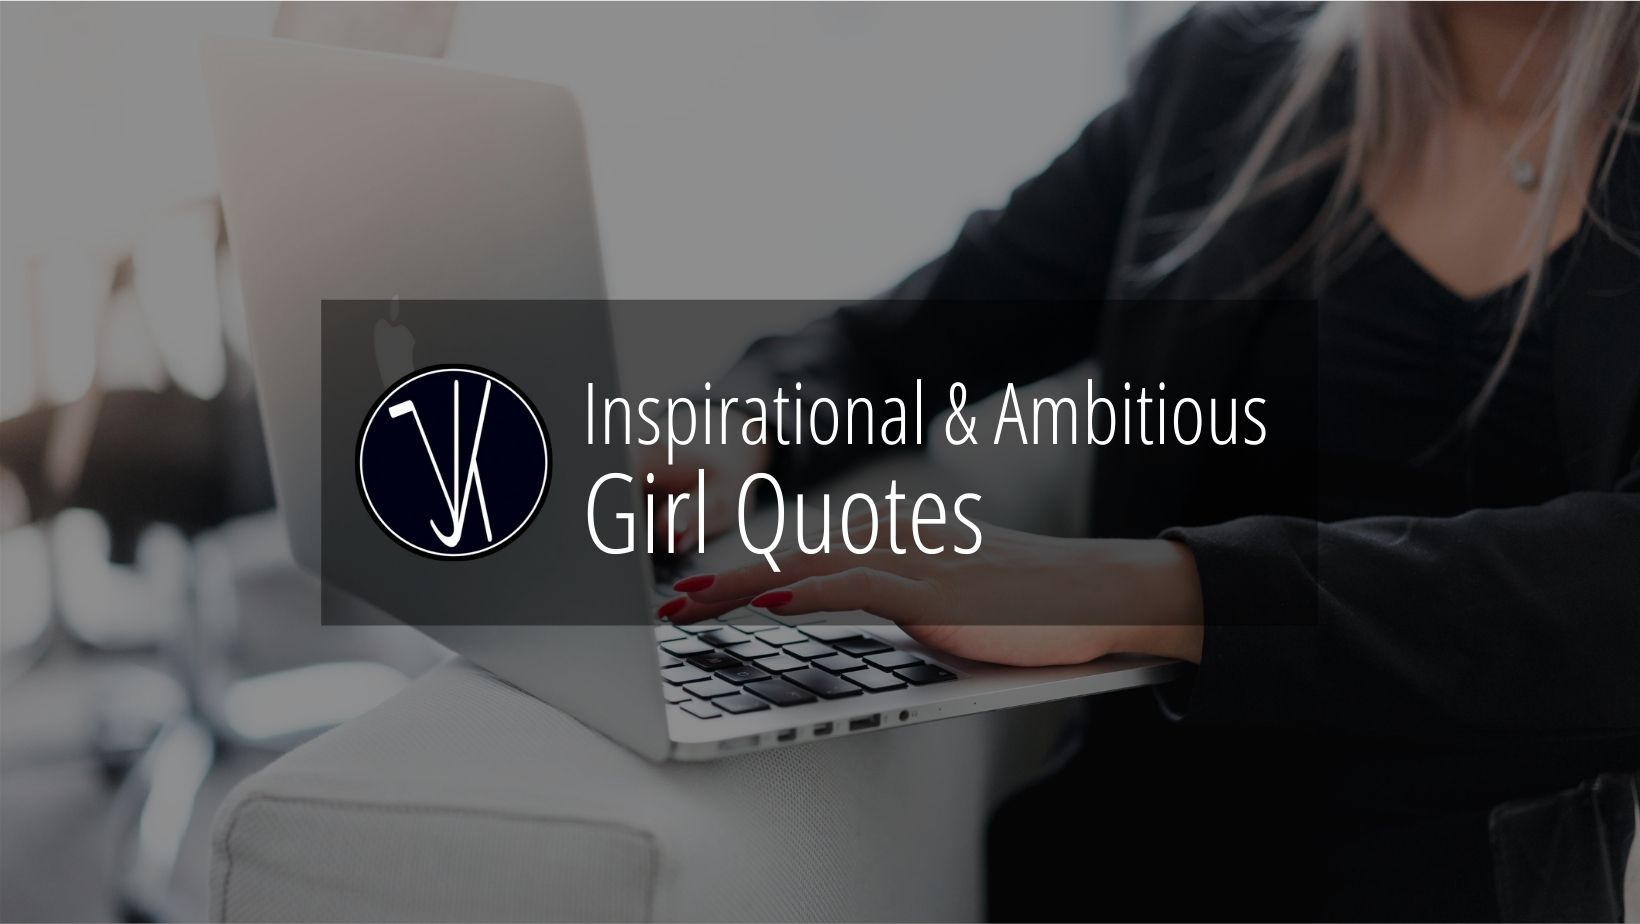 Ambitious Girl Quotes